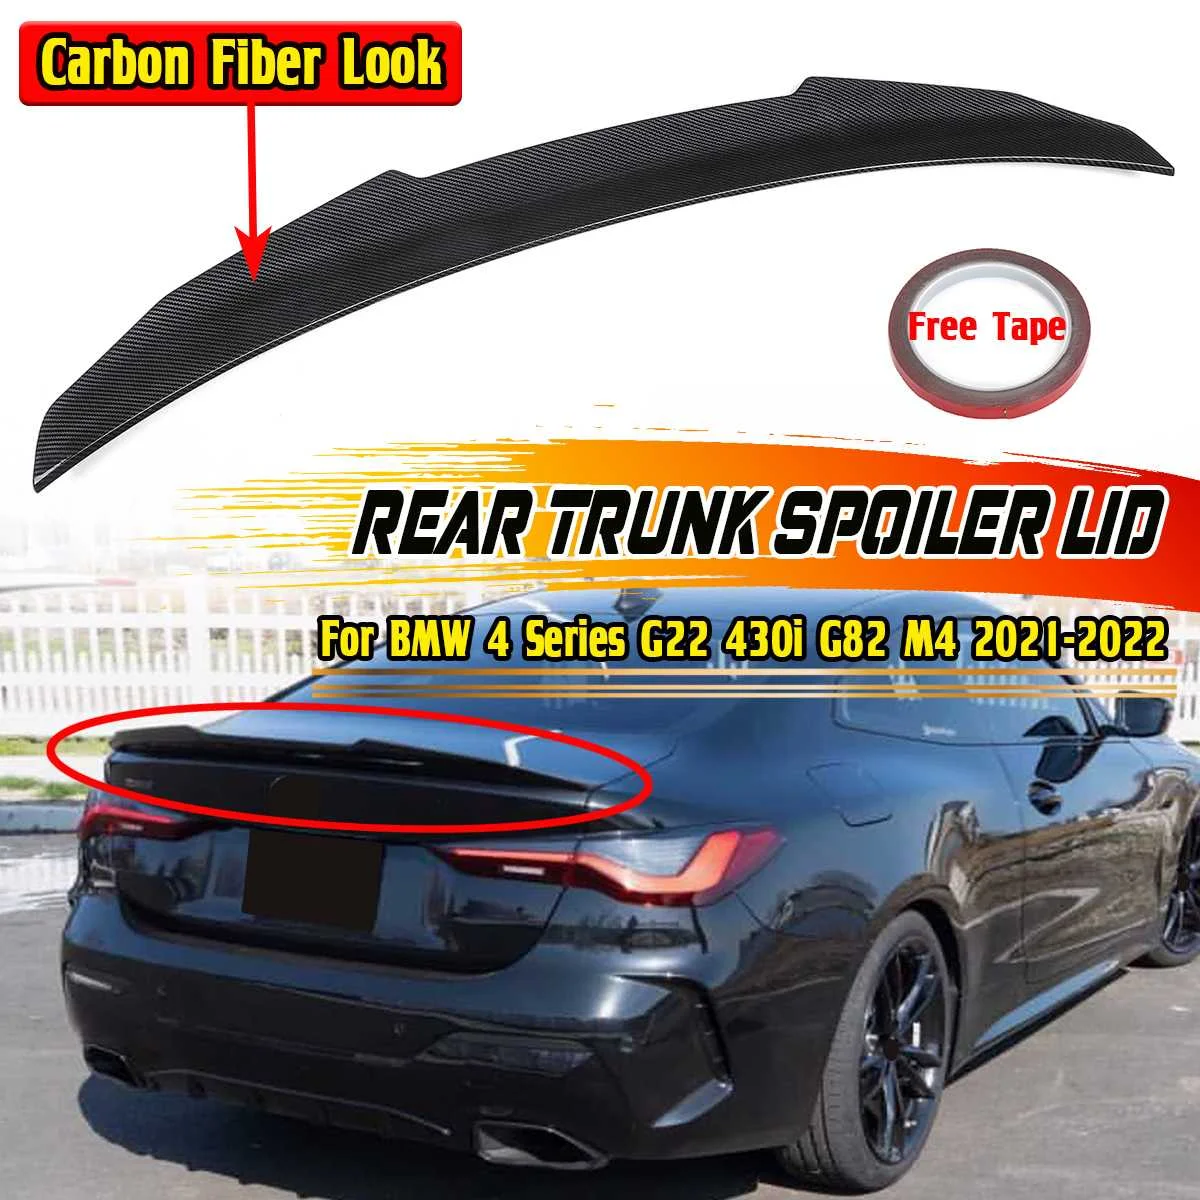 G22 PSM Style Car Rear Spoiler Wing Trunk Lip Trunk Spoiler Lid For BMW 4 Series G22 430i G82 M4 2021-2022 Rear Wing Spoiler